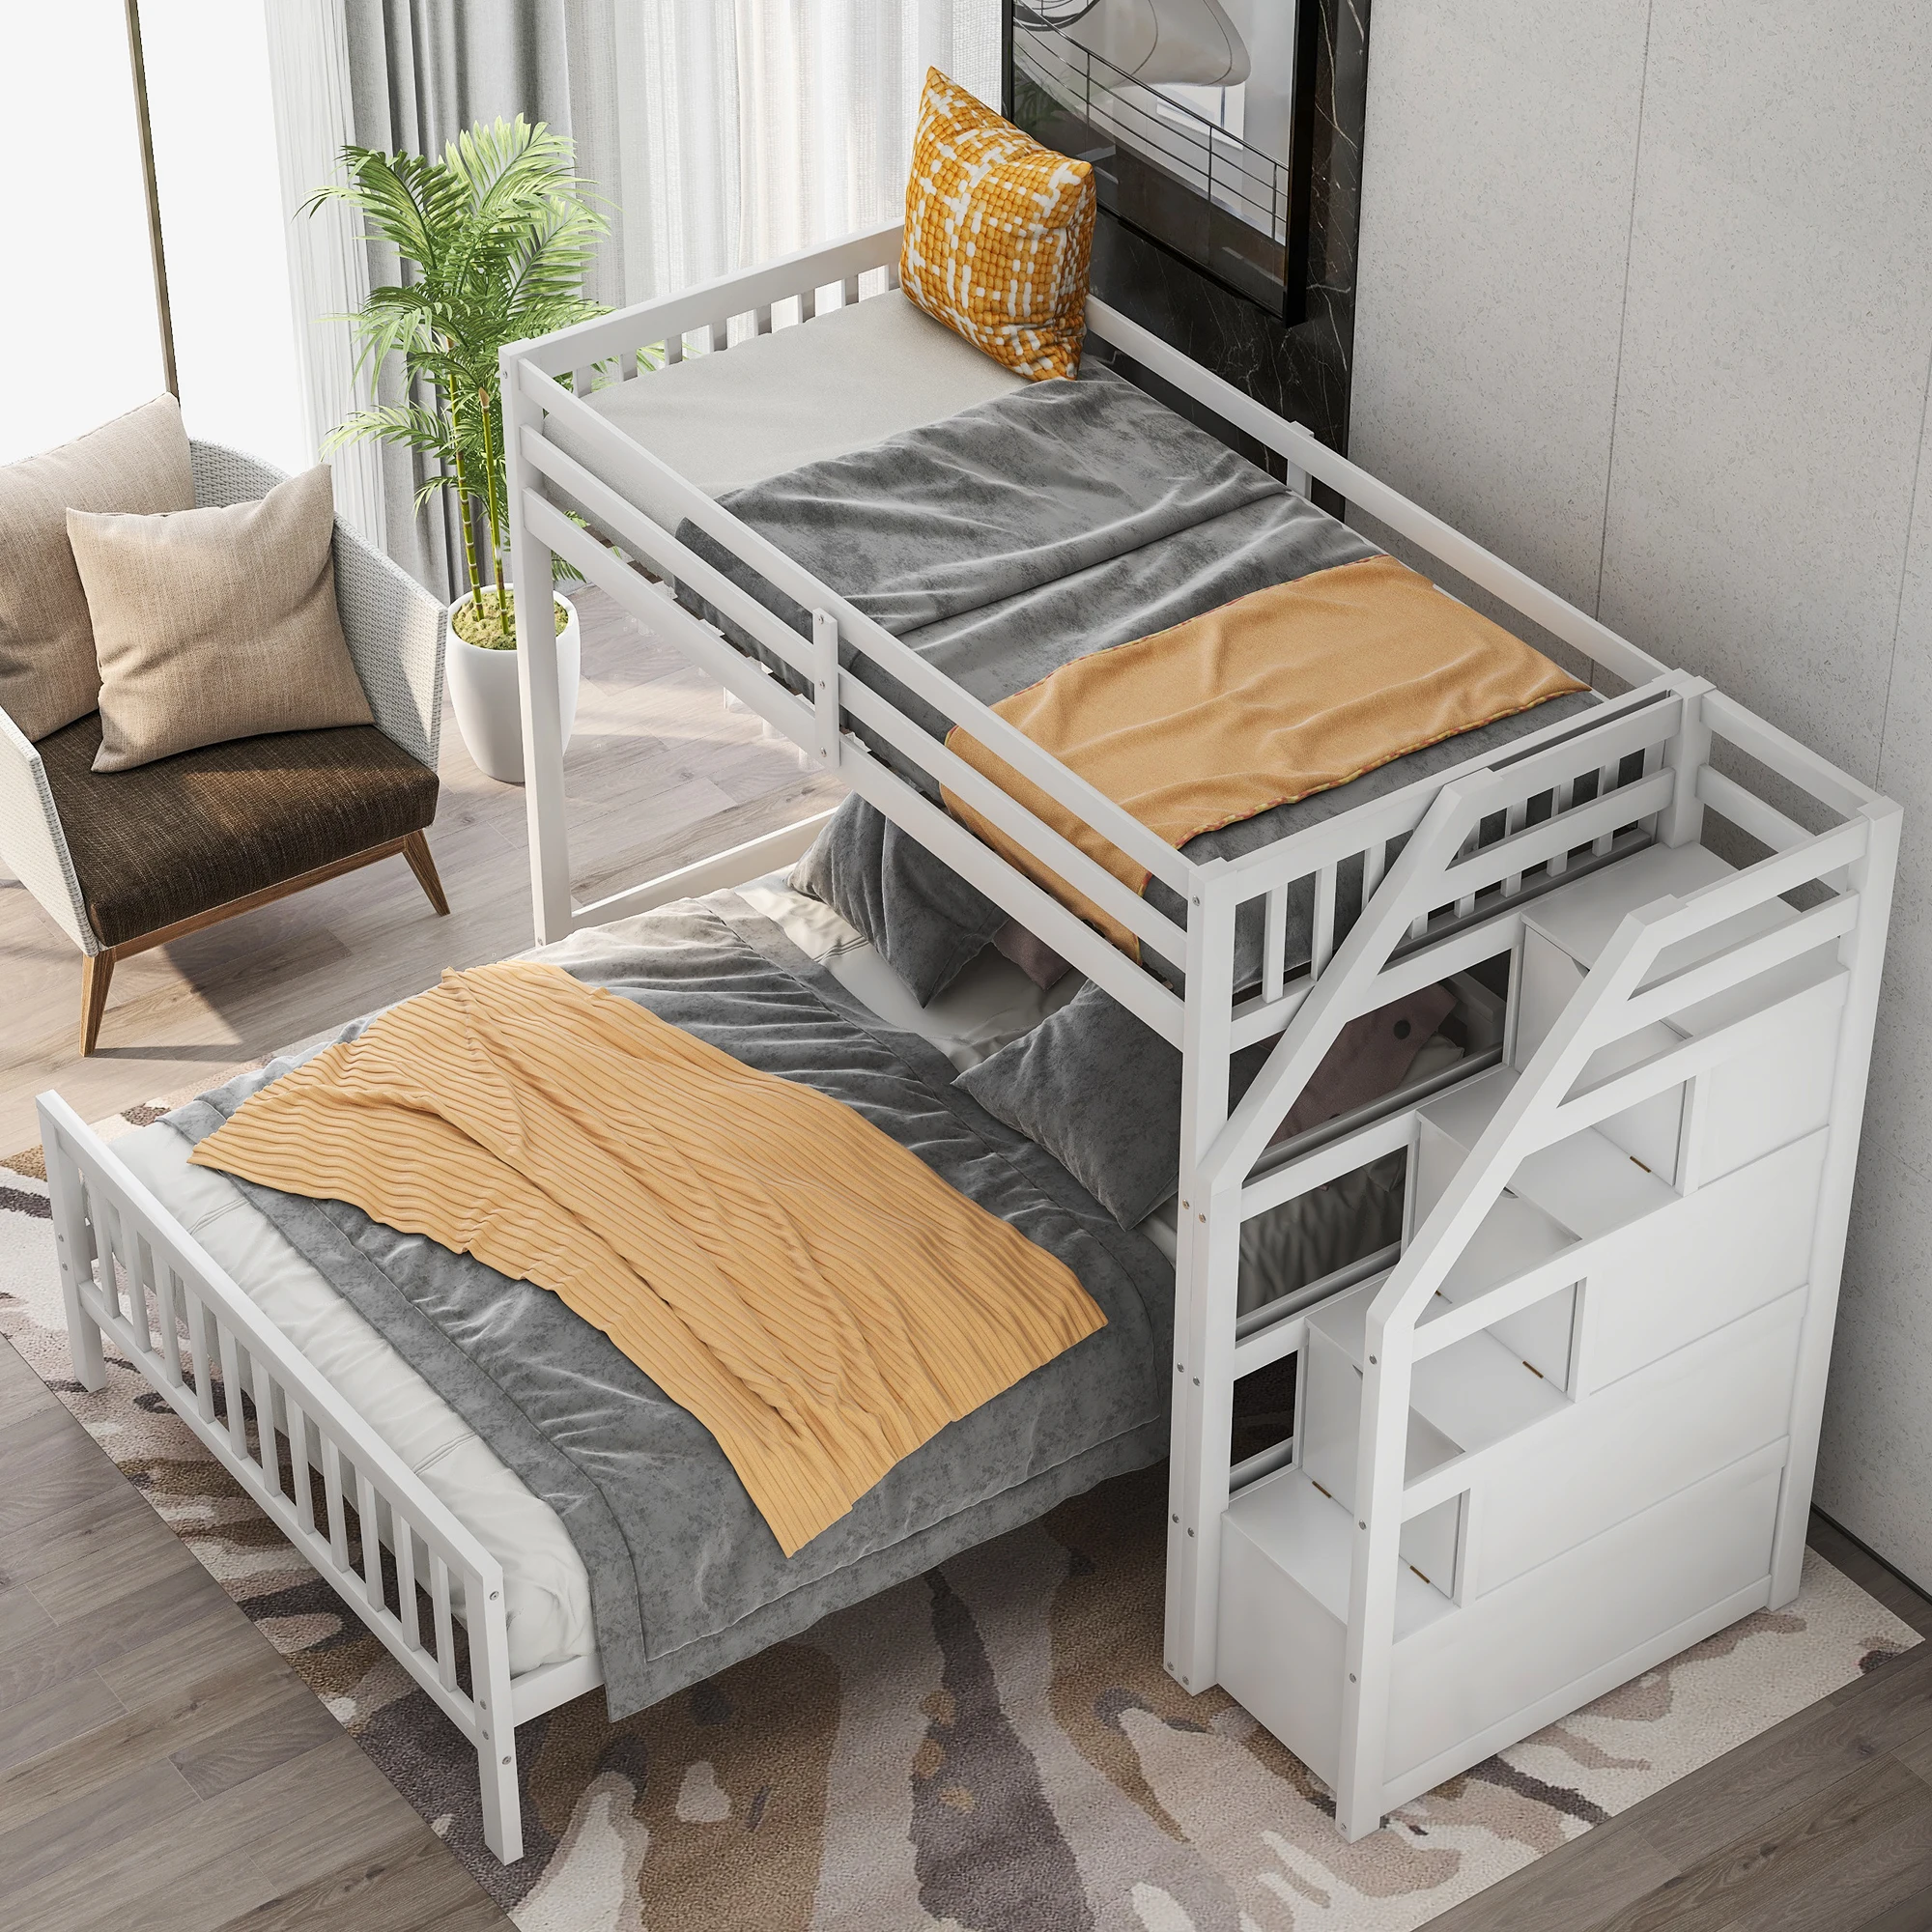 kids small double bed